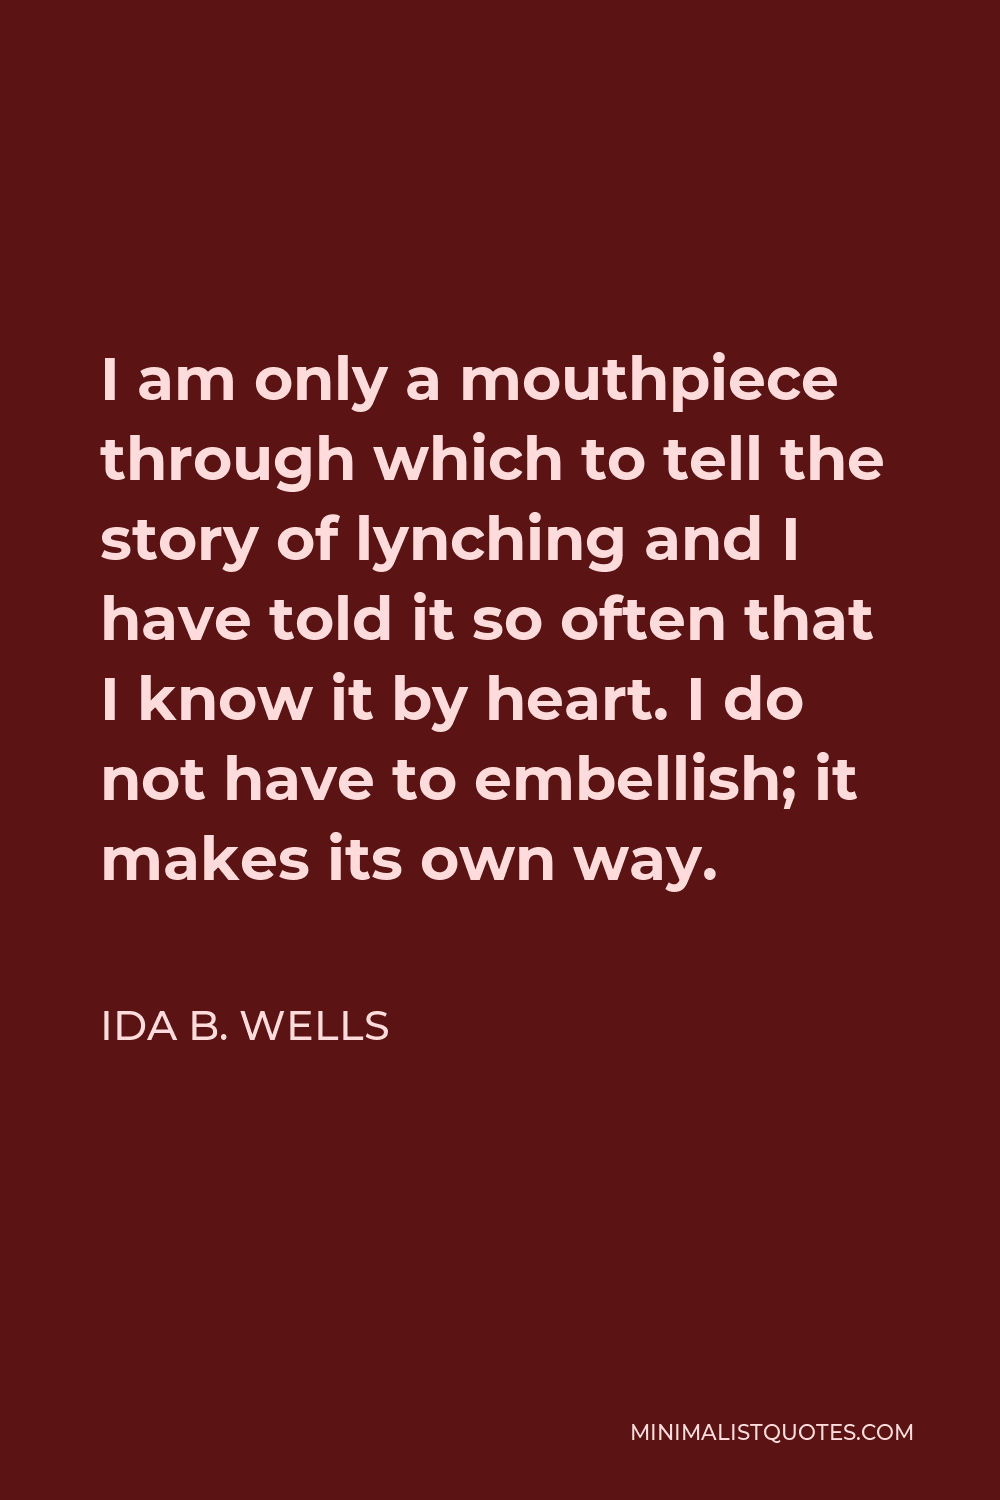 Ida B. Wells Quote - I am only a mouthpiece through which to tell the story of lynching and I have told it so often that I know it by heart. I do not have to embellish; it makes its own way.